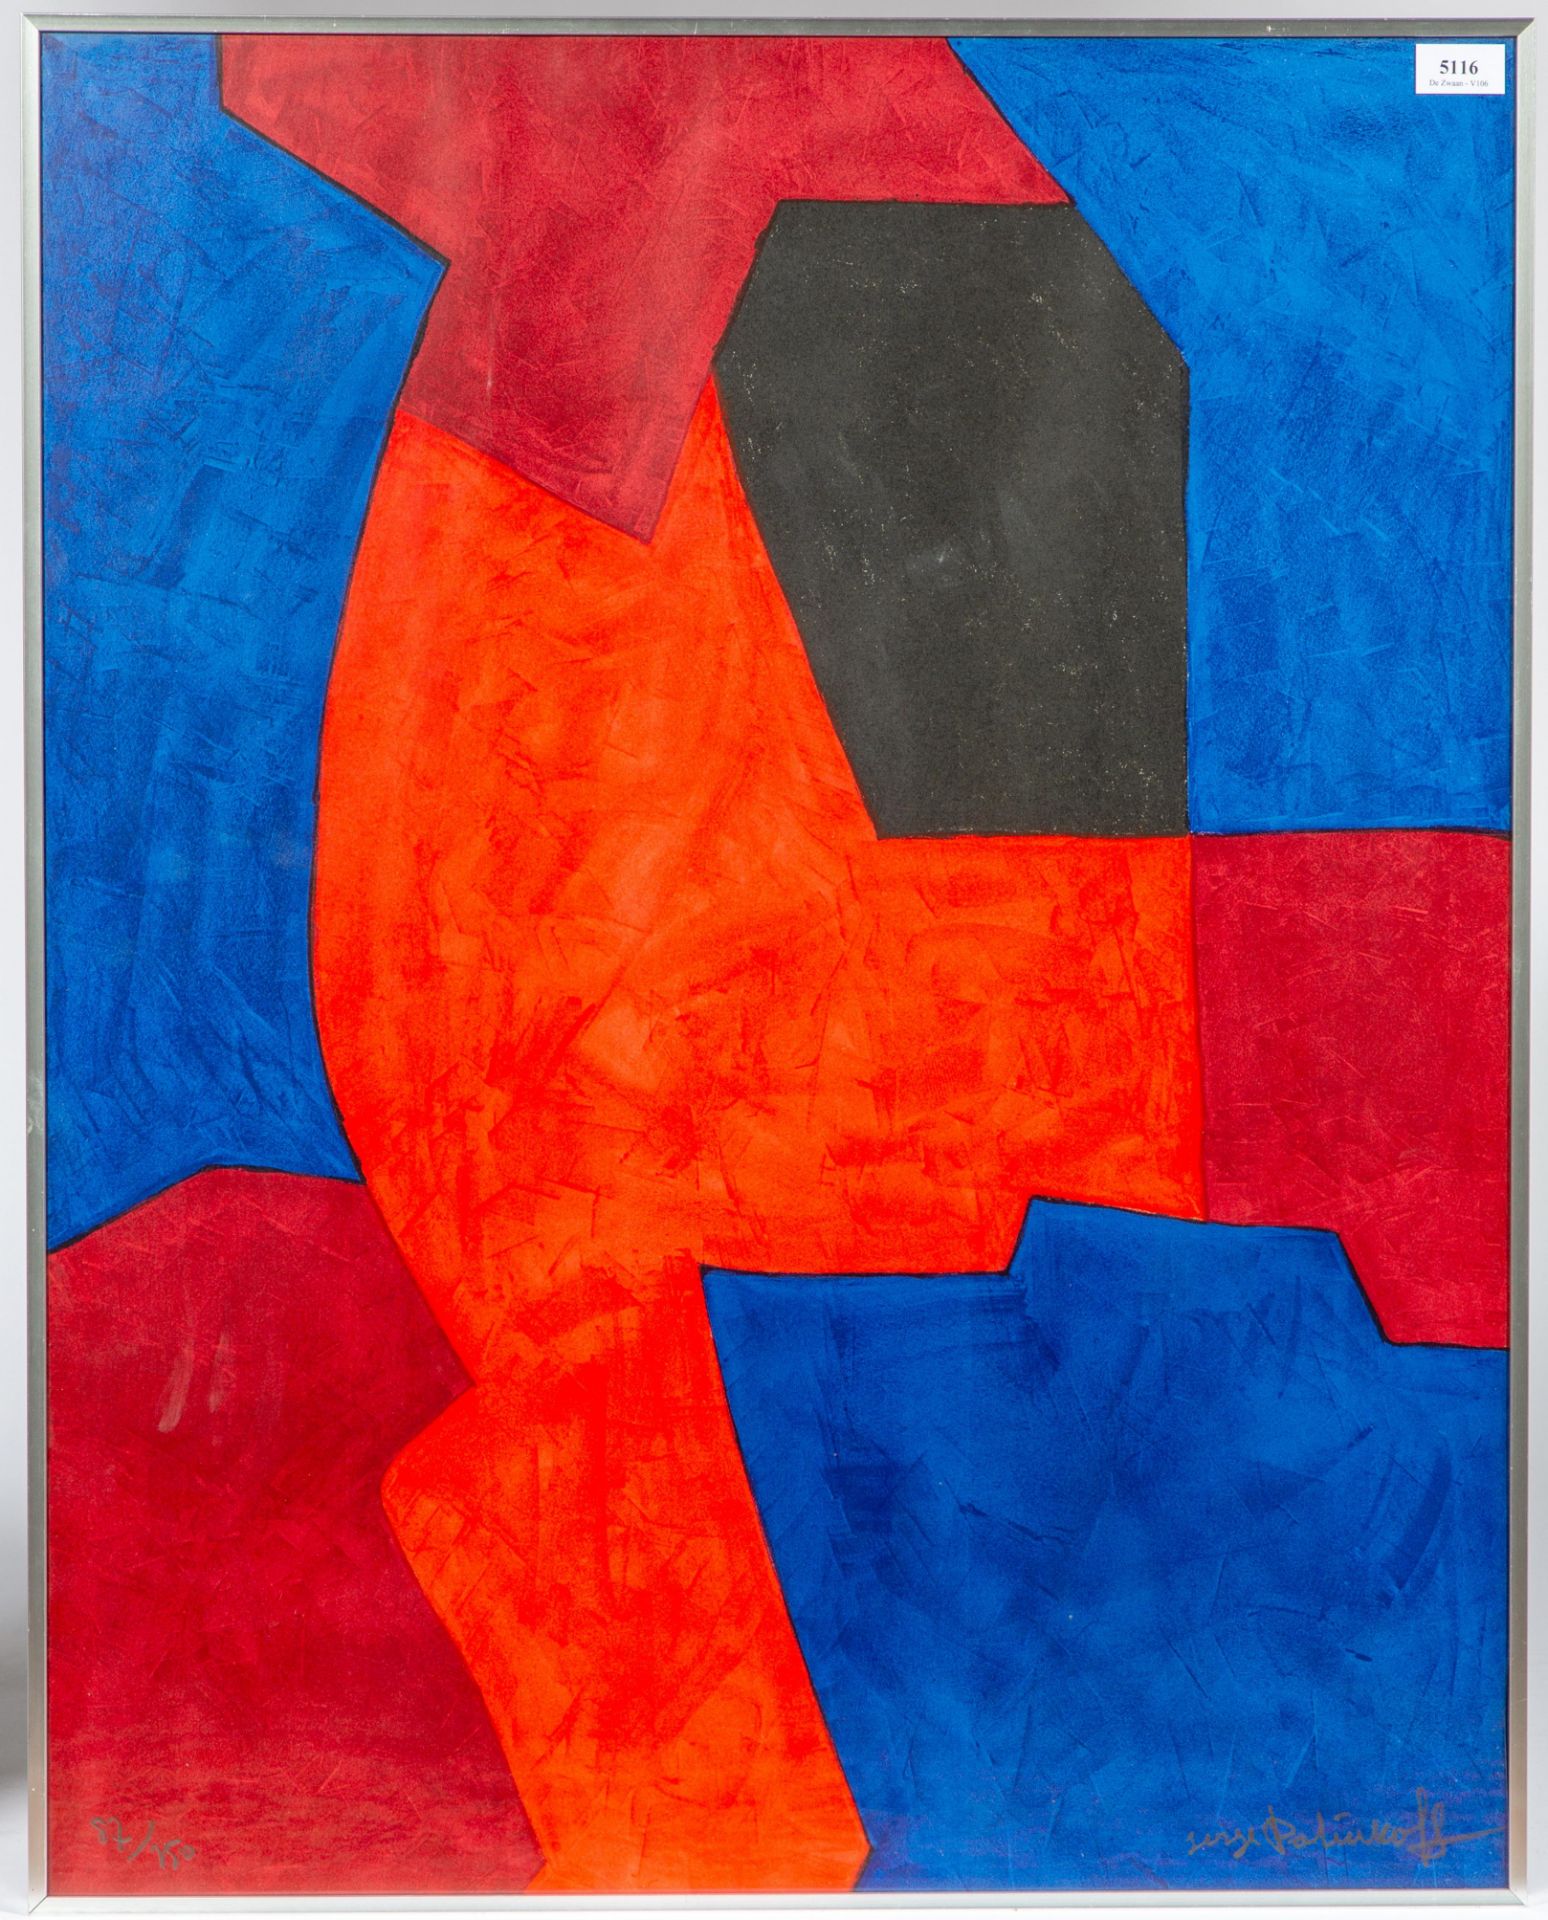 After Serge Poliakoff (1900-1969)